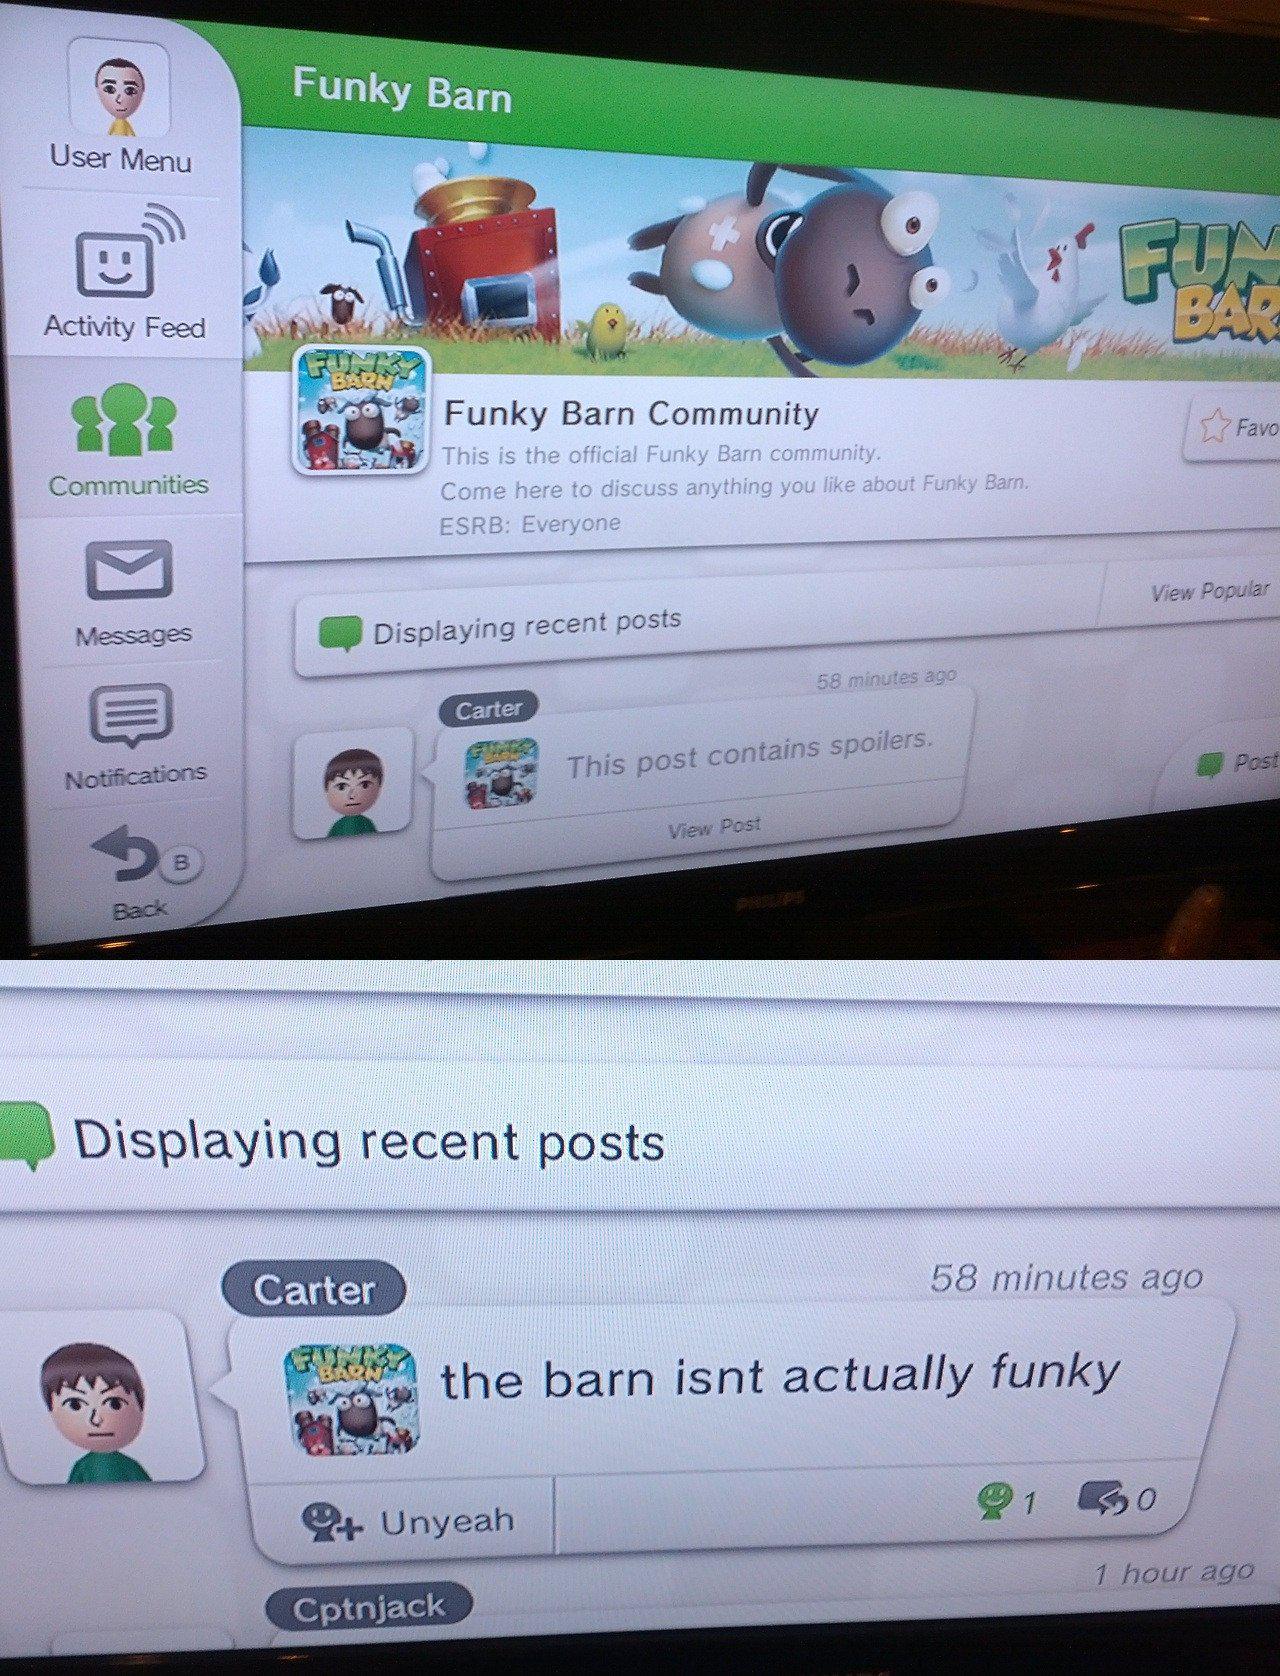 Cringe, Miiverse, Carter, Wii, Unyeah, HfXXKJuw cringe memes Cringe, Miiverse, Carter, Wii, Unyeah, HfXXKJuw text: User Menu Activity Feed Communities Messages Funky Barn Funky Barn Community This is the official Funky Barn community. Come here to discuss anything you like about Funky Earn. ESRB: Everyone View Popular Displaying recent posts Carter J This post contains spoilers. View 58 minutes ago Displaying recent posts Carter the barn isnt actually funky Unyeah I hour ago Cptnjack 